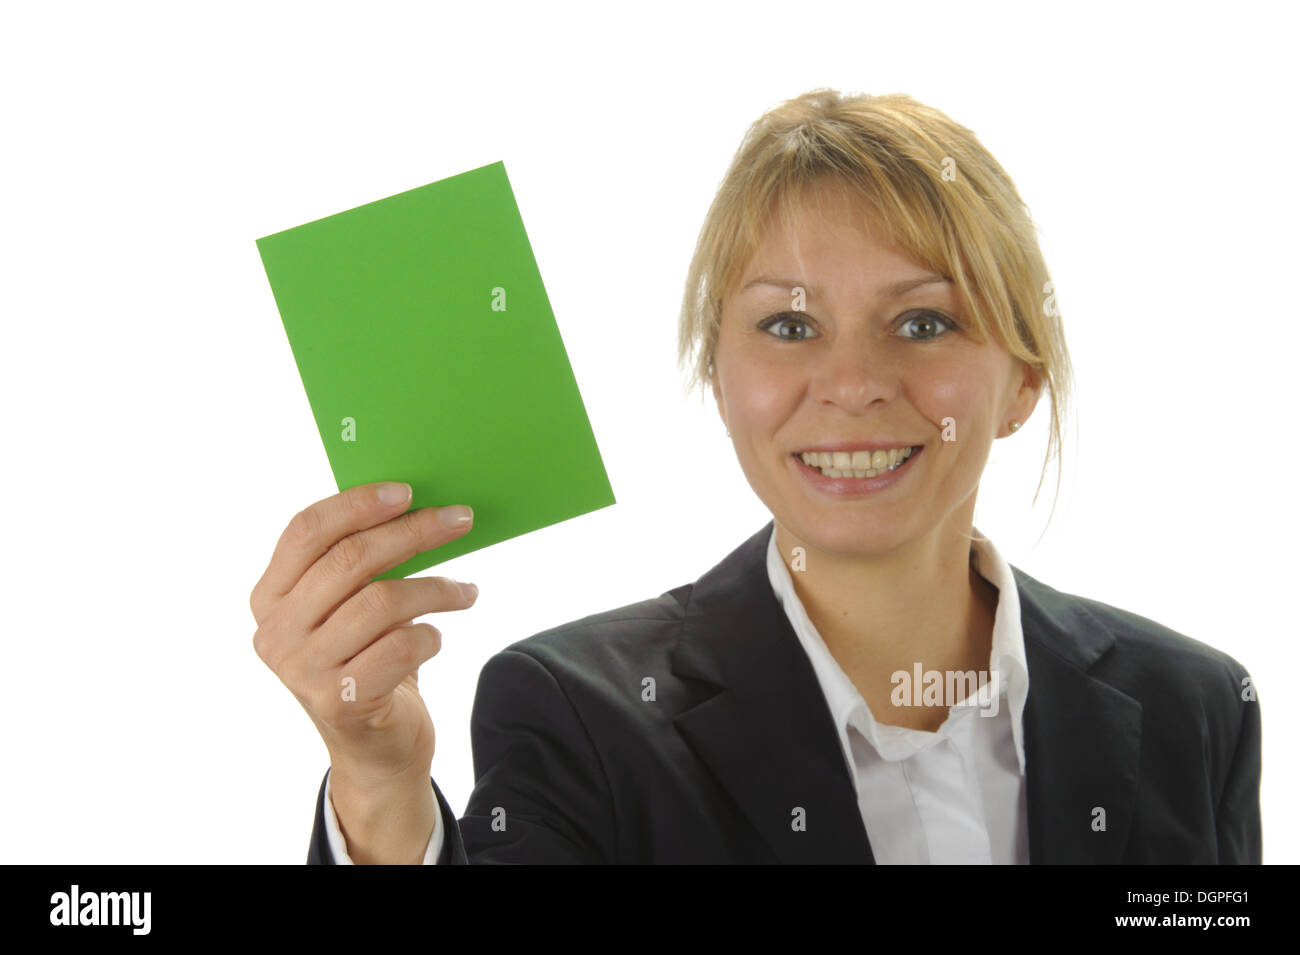 green card for acceptance Stock Photo